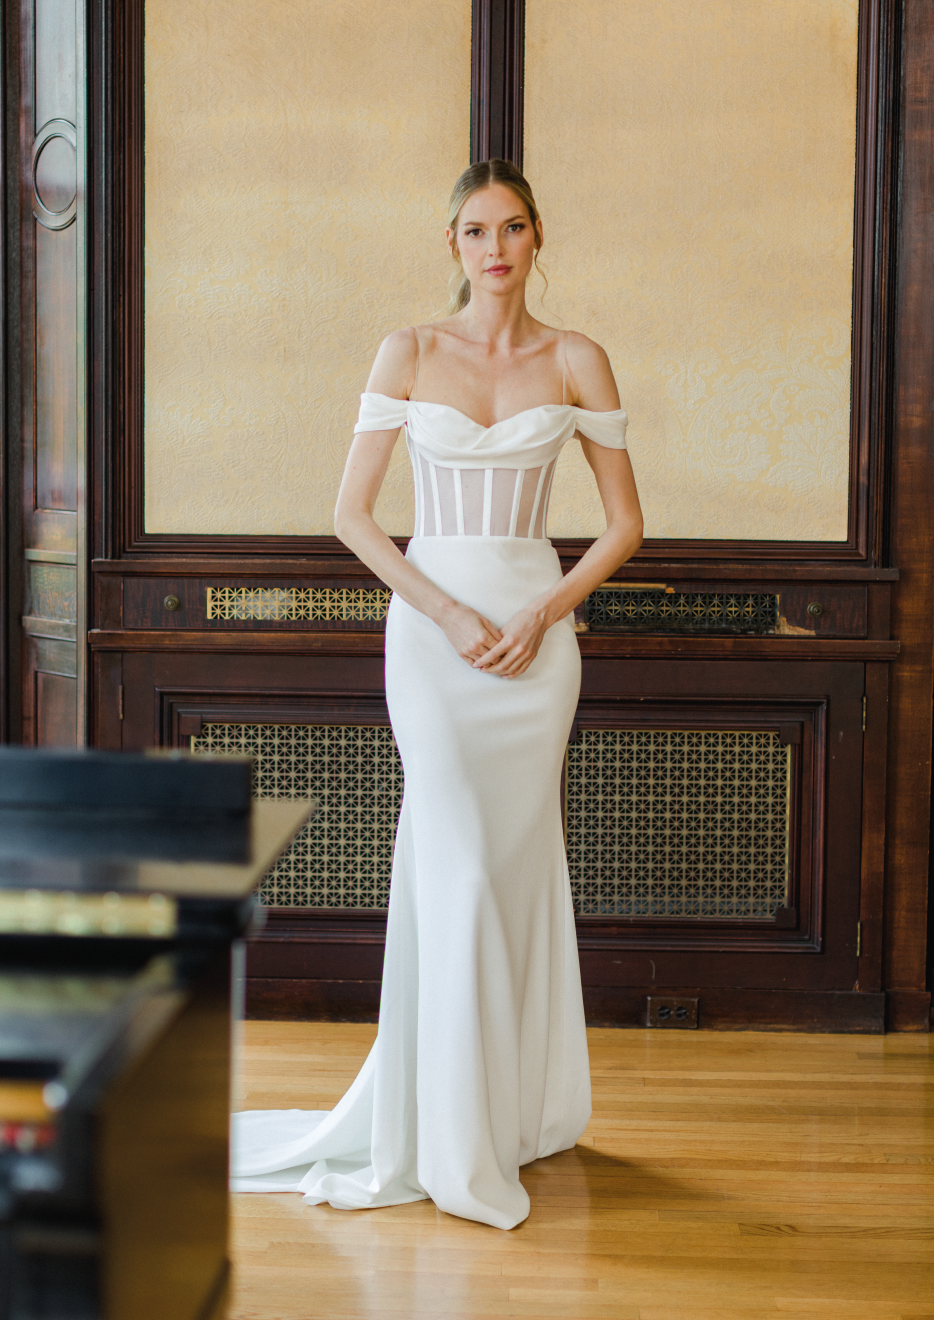 Bridal Dress Model Victoria - off the shoulder draped stretch gown with dramatic trumpet skirt and chapel train - Verdin New York